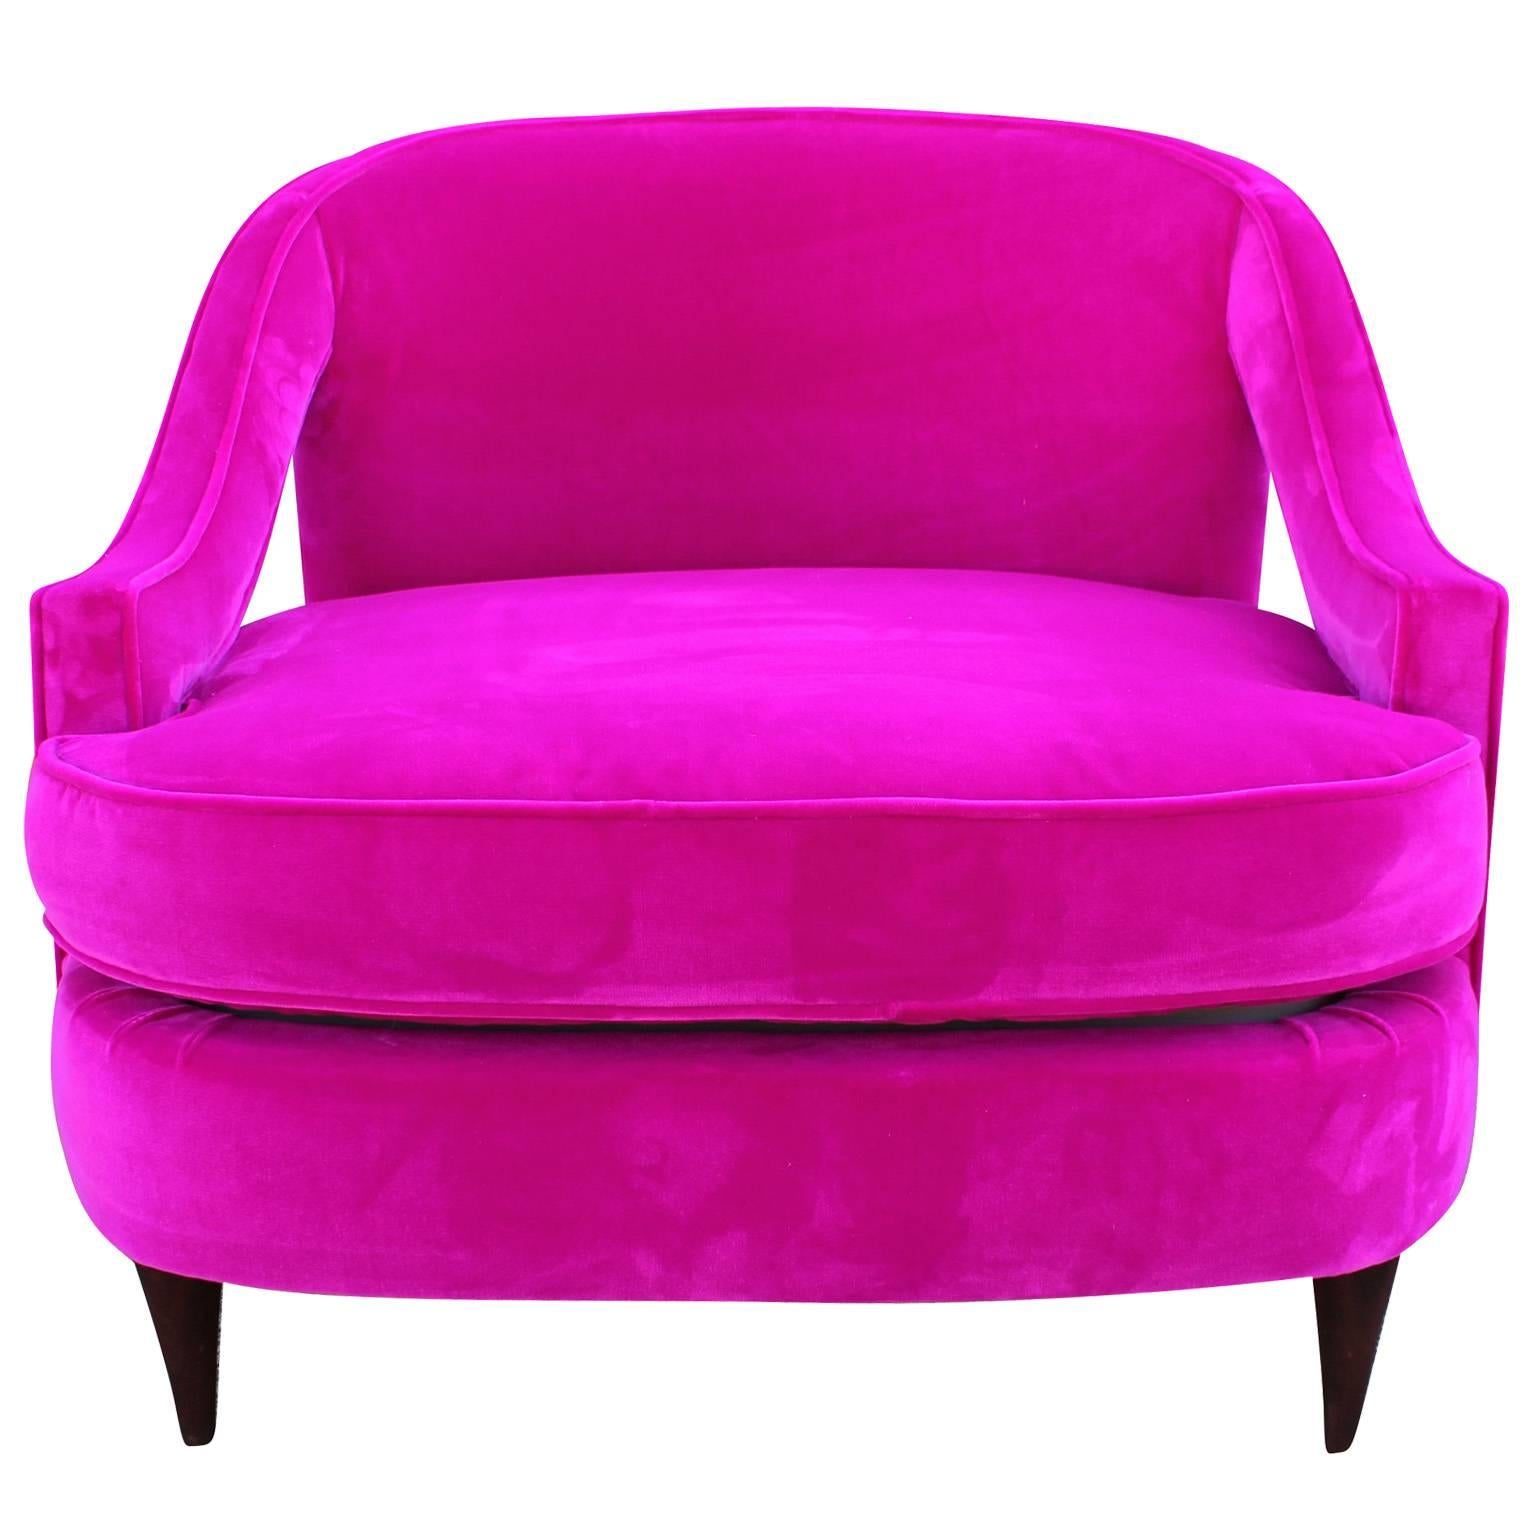 Ultra glam chair freshly upholstered in a luxe fuchsia or hot pink velvet. Chair has elegant lines with swooped upholstered arms and finished with dark walnut tapered legs. Perfect accent chair!